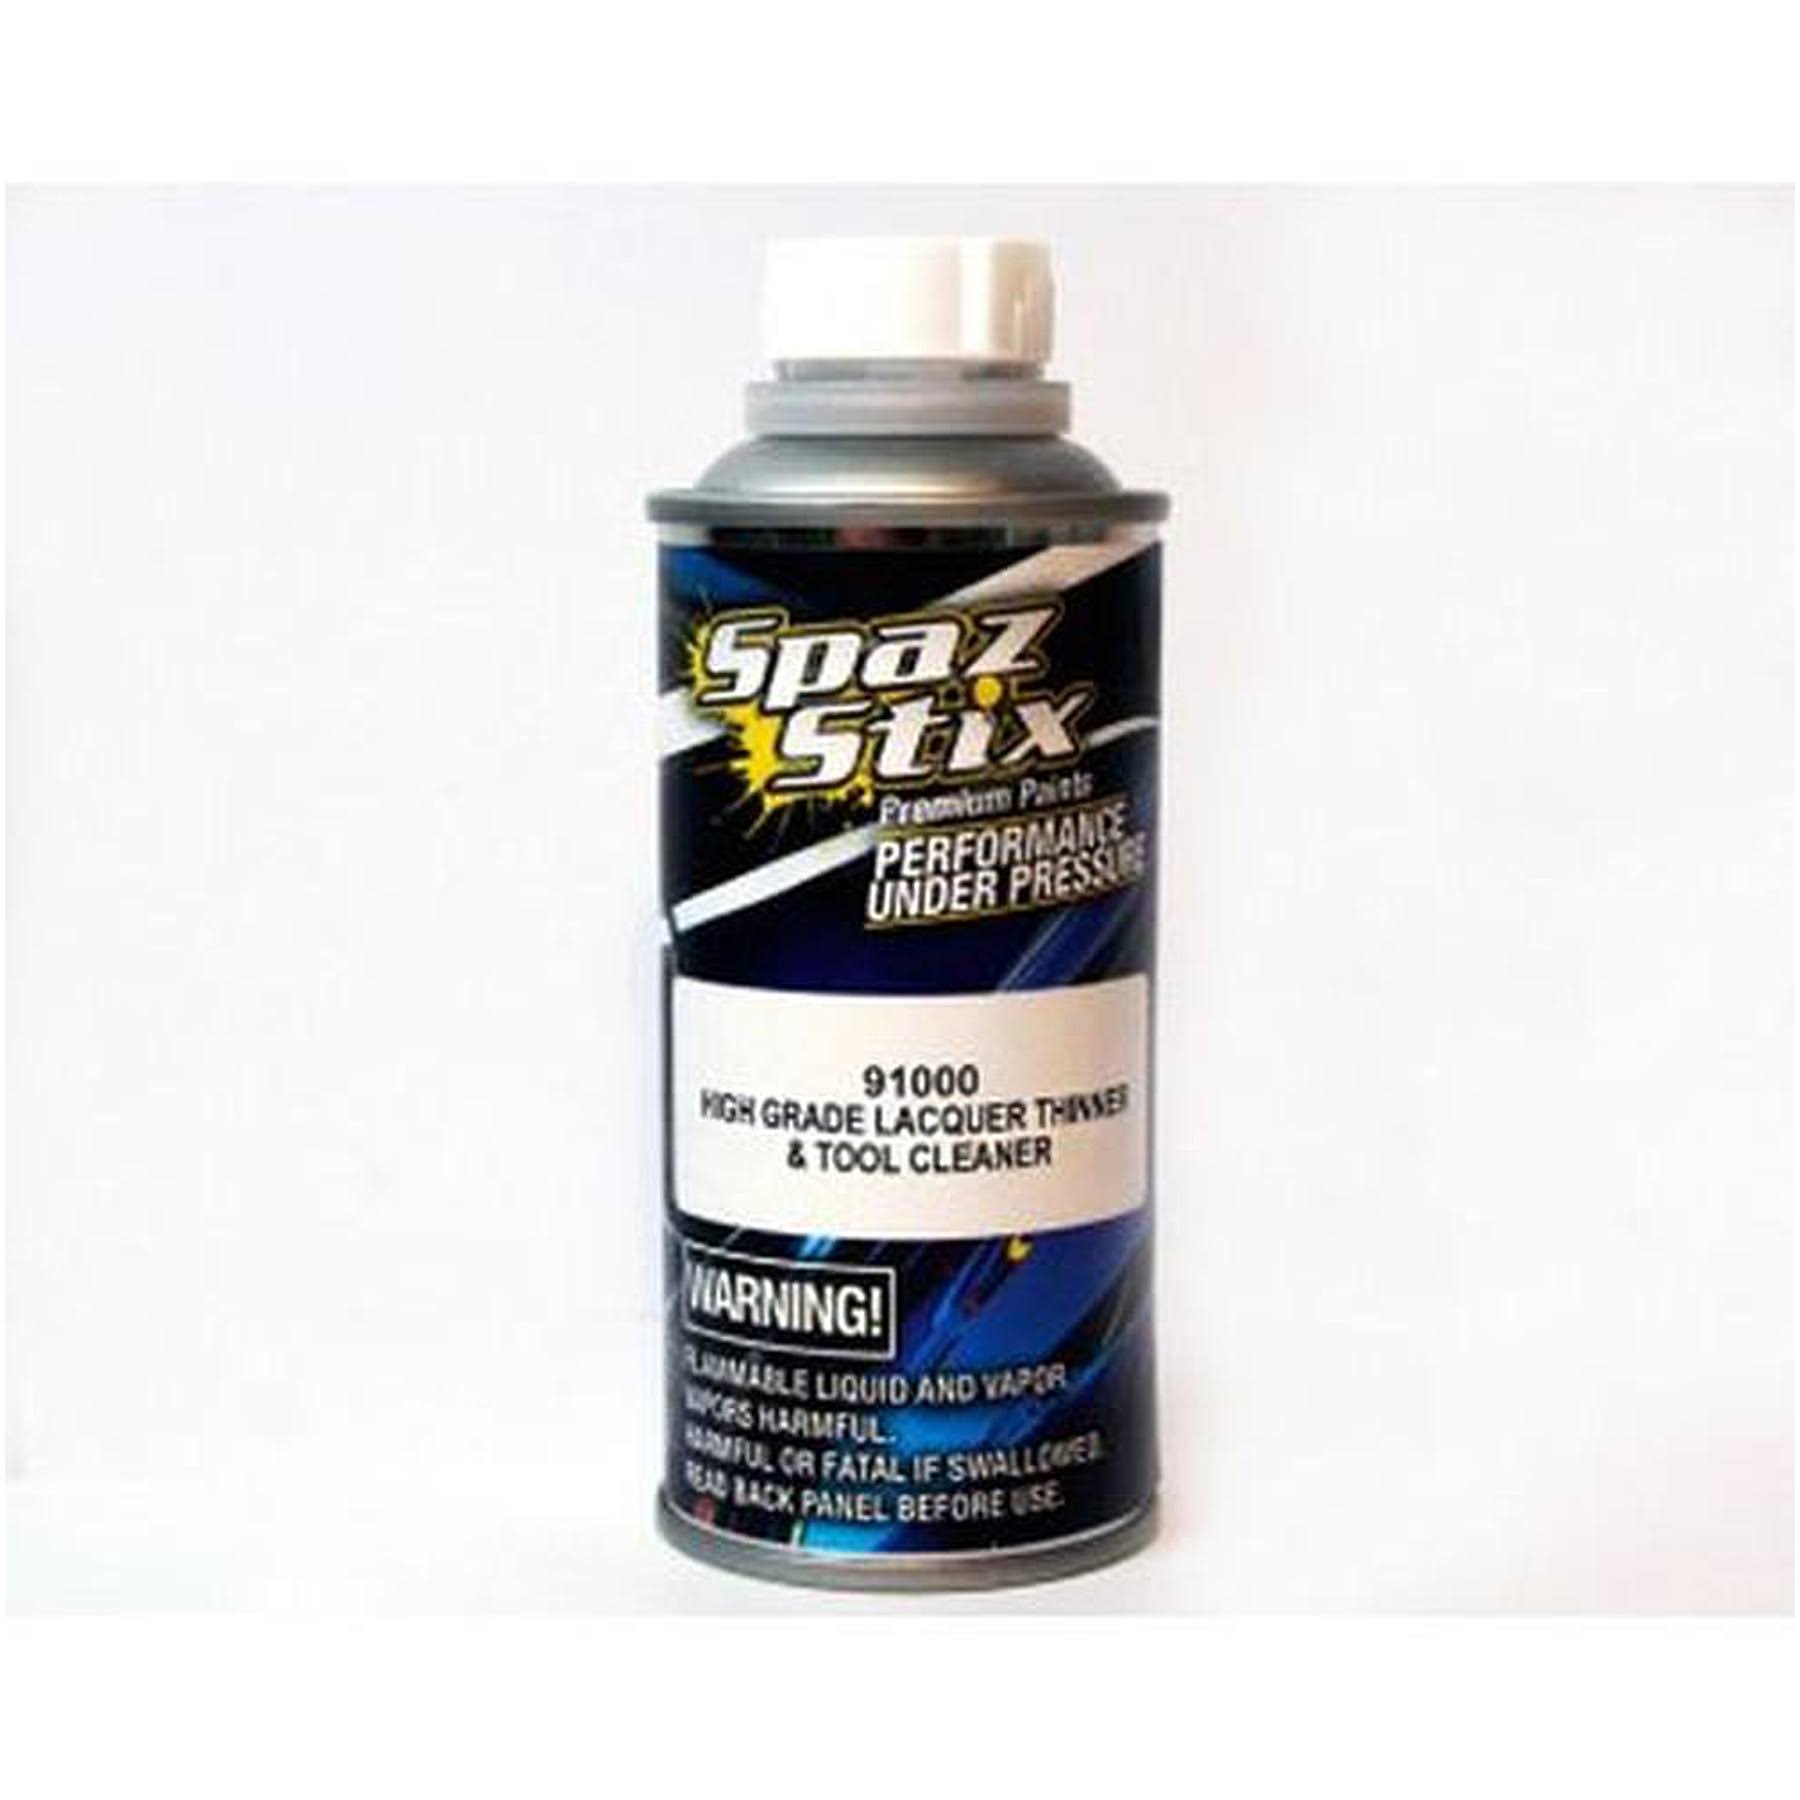 Spaz Stix High Grade Lacquer Thinner and Tool Cleaner - 180ml